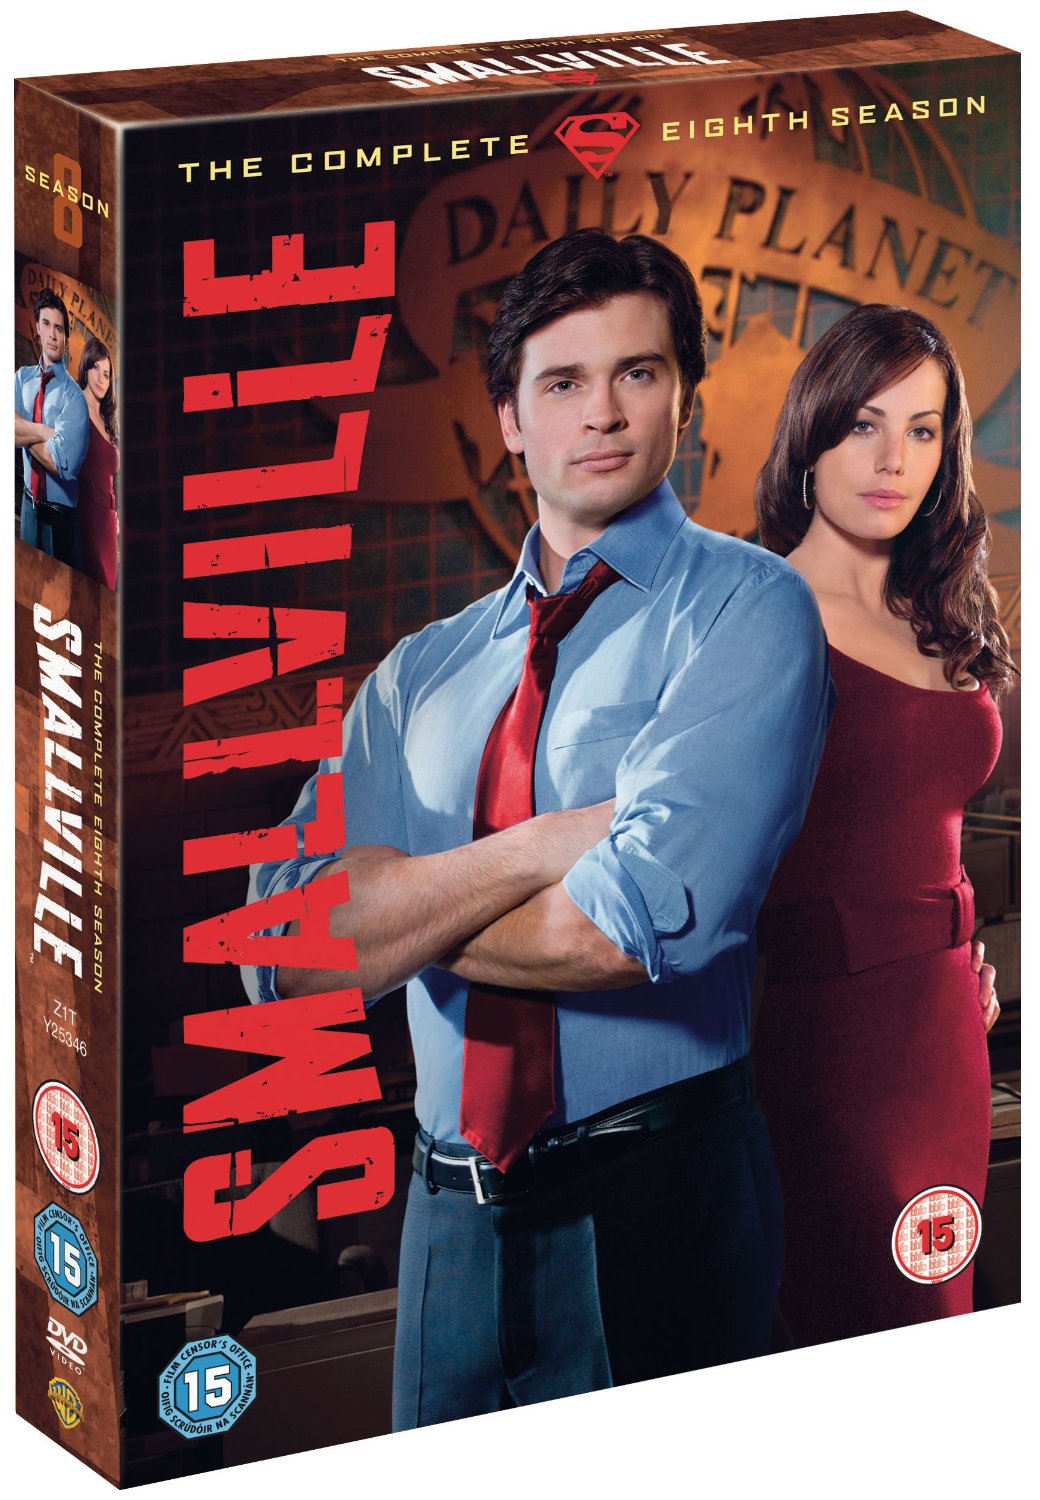 Watch Smallville Online Full Episodes in HD FREE